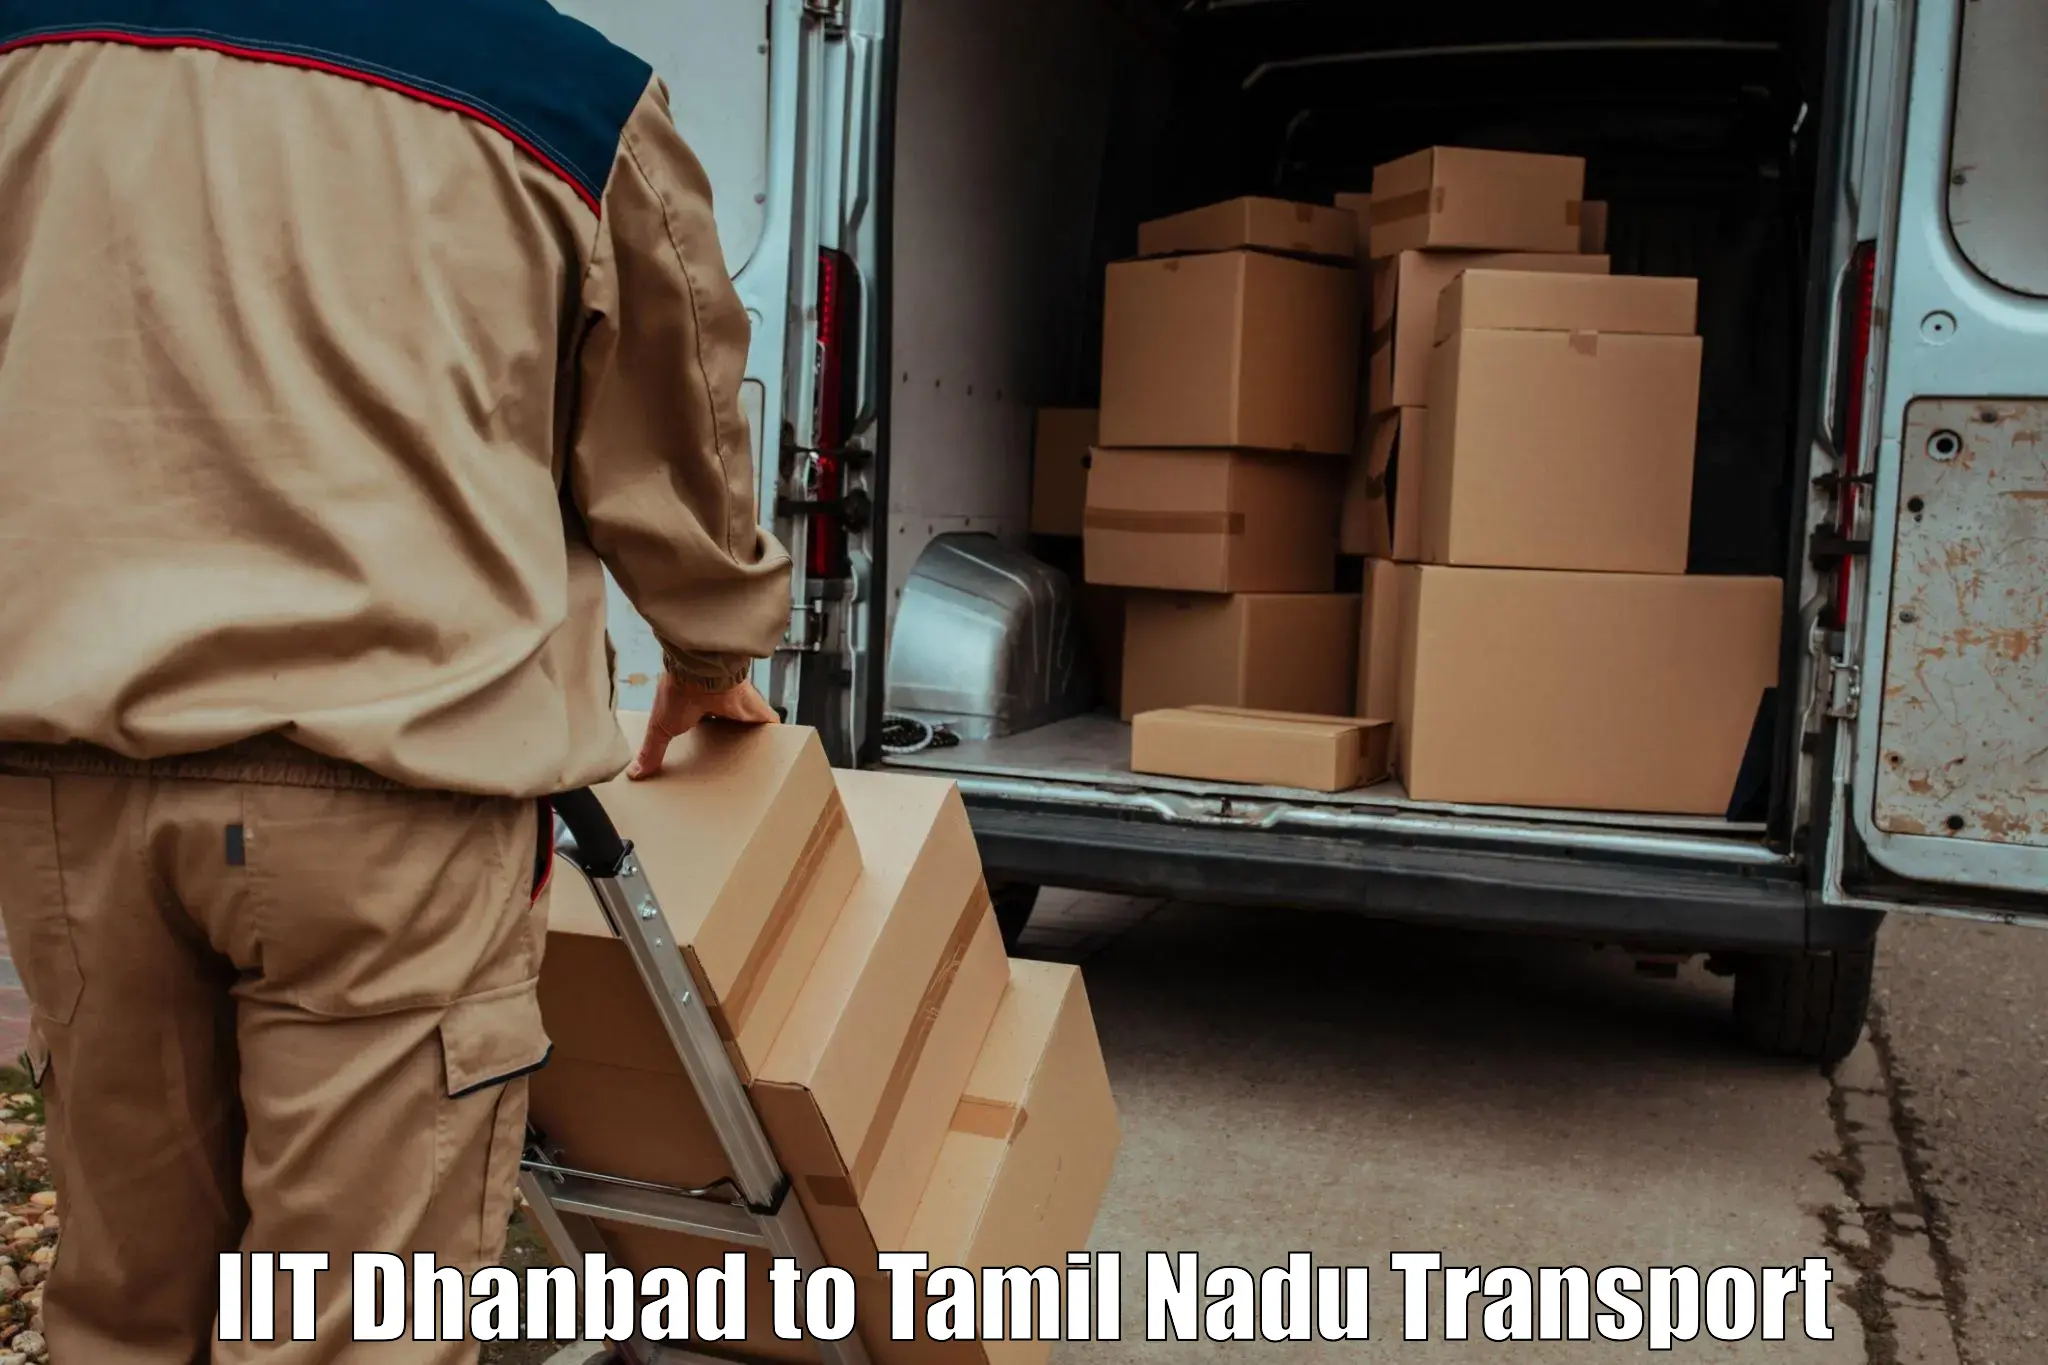 Lorry transport service IIT Dhanbad to Muthukulathur